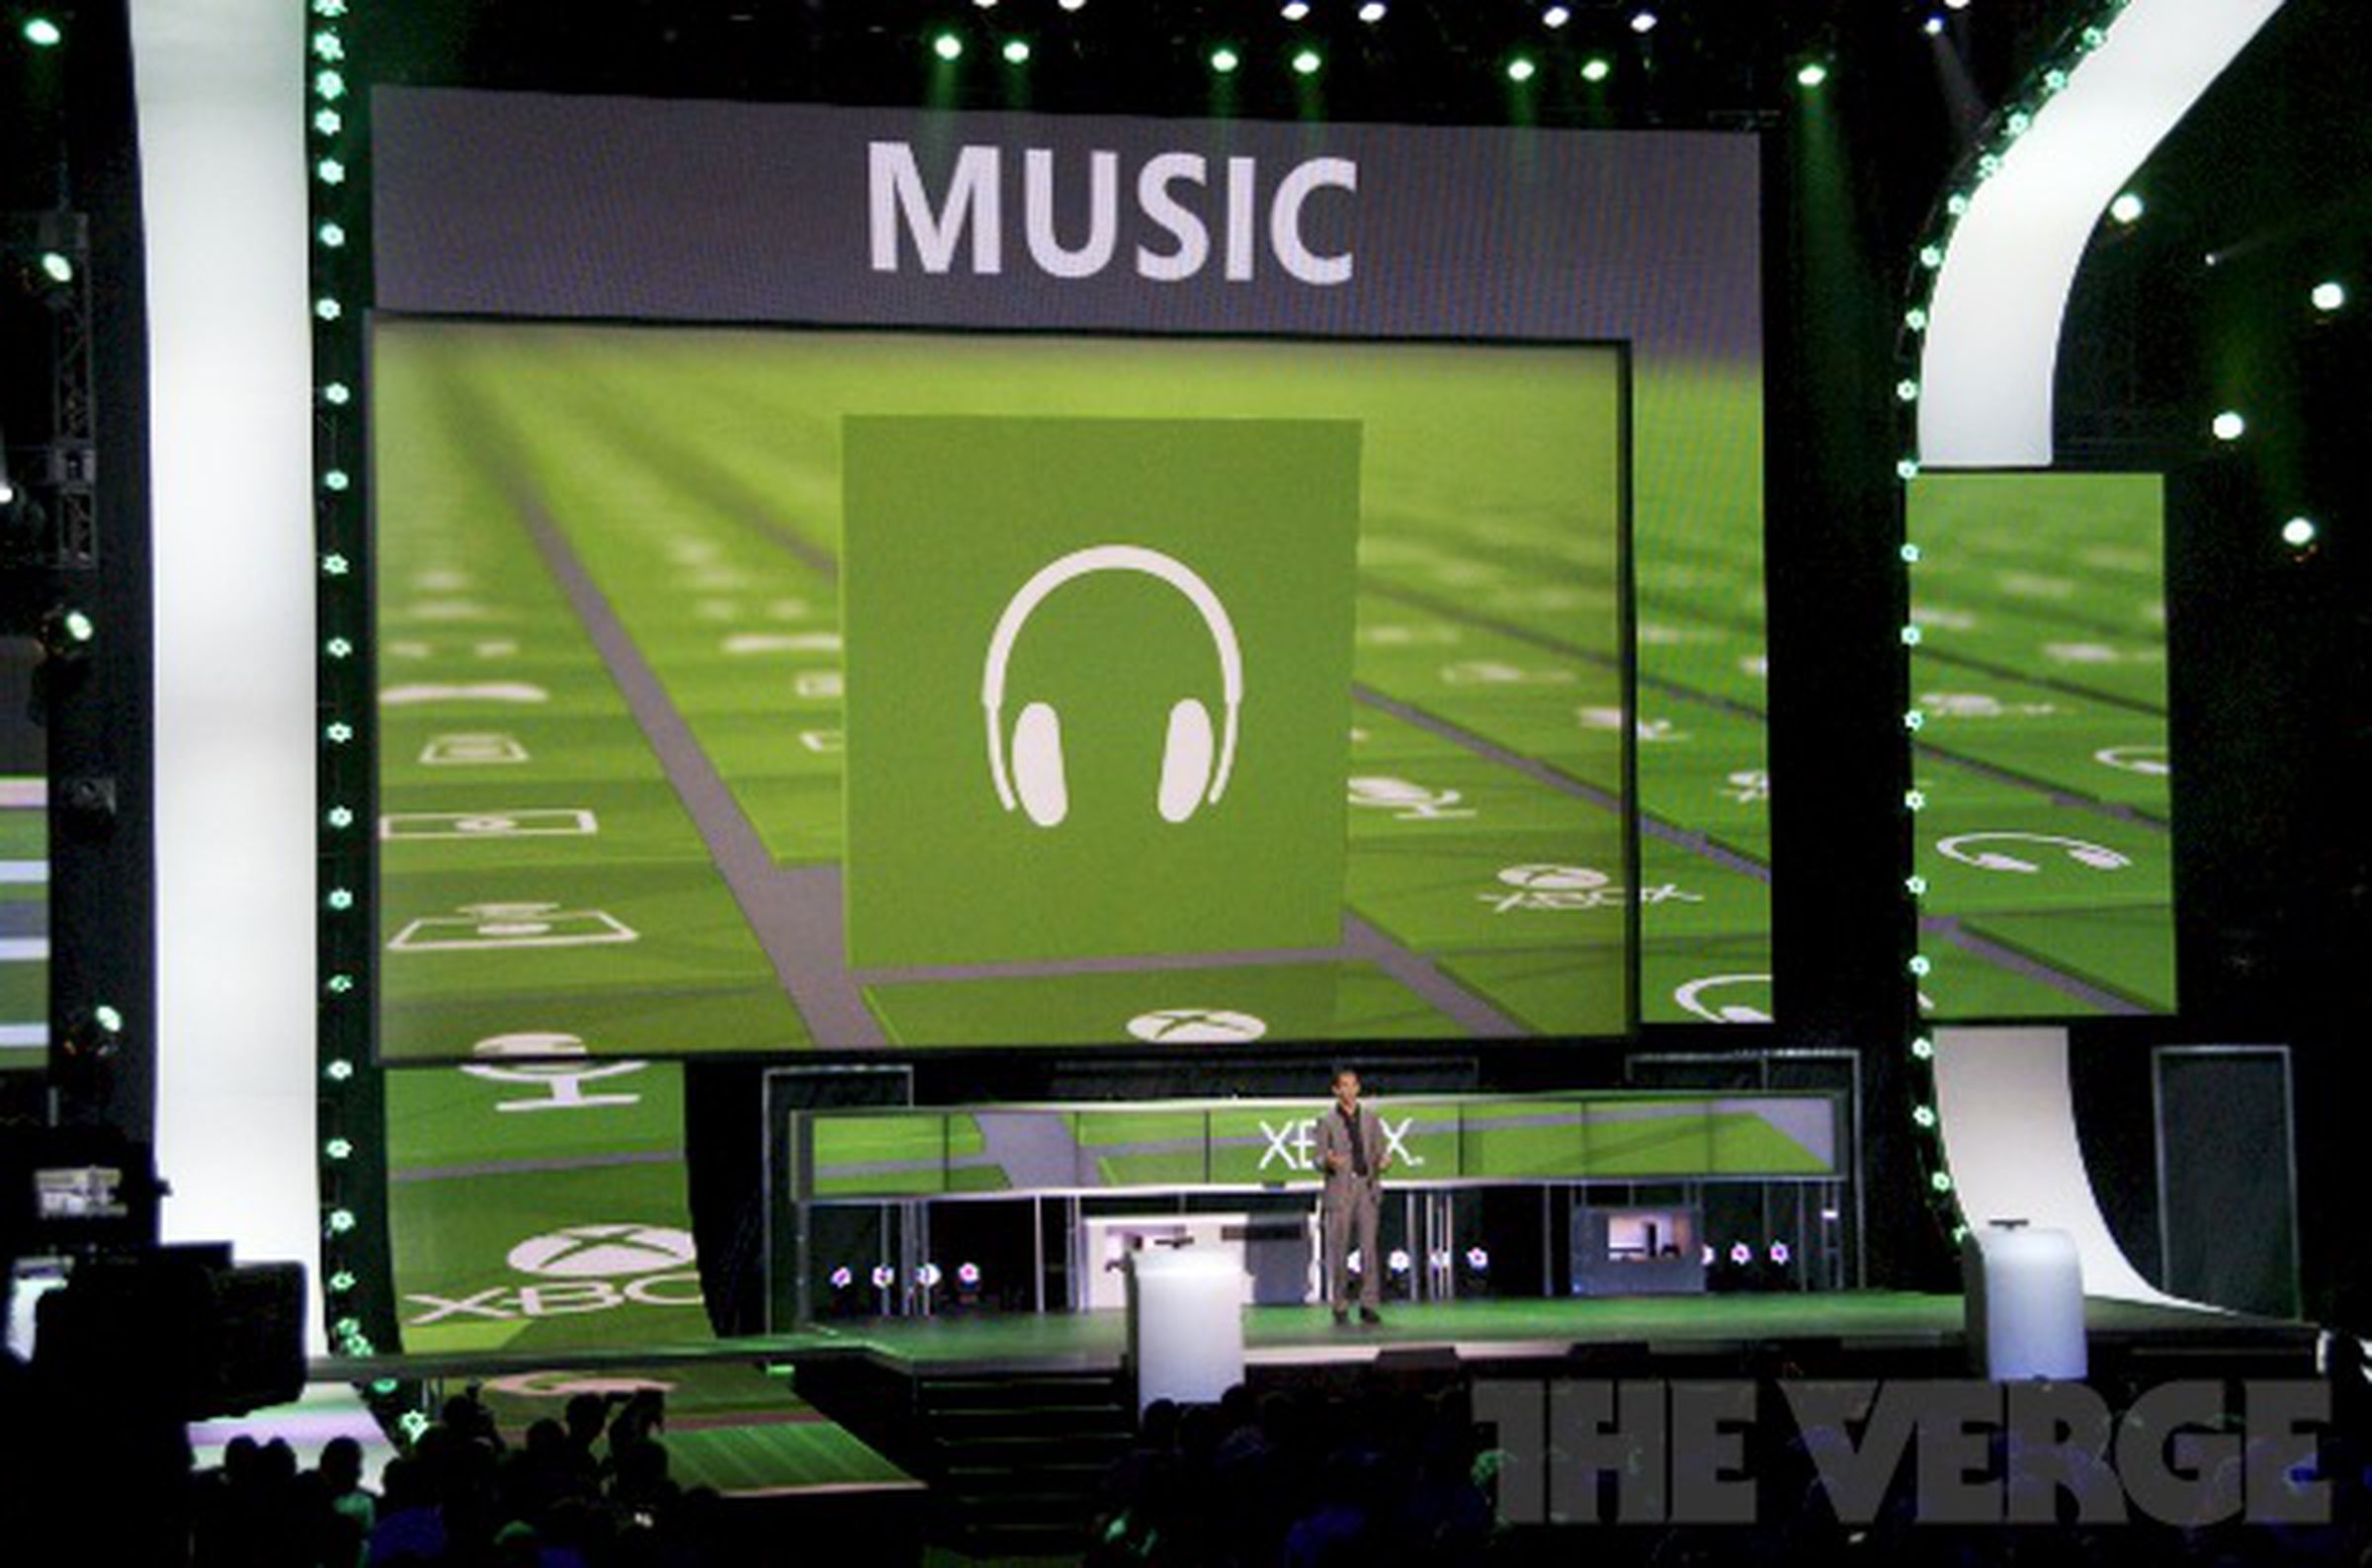 Xbox Music pictures